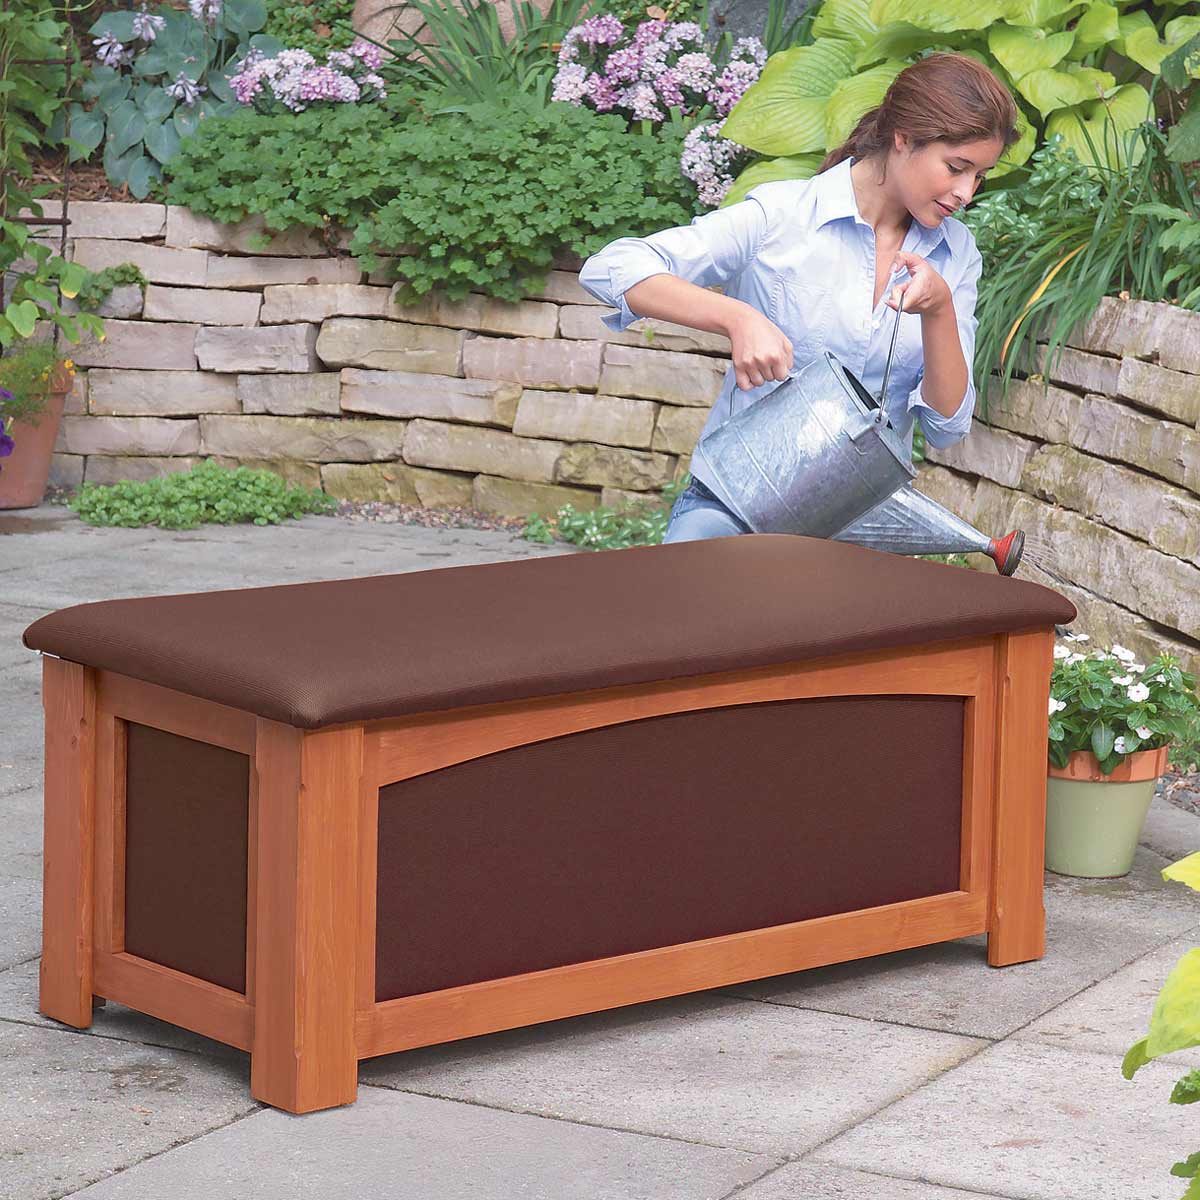 4 Foot Outdoor Bench Seat Cushion Only - Pool Furniture Supply